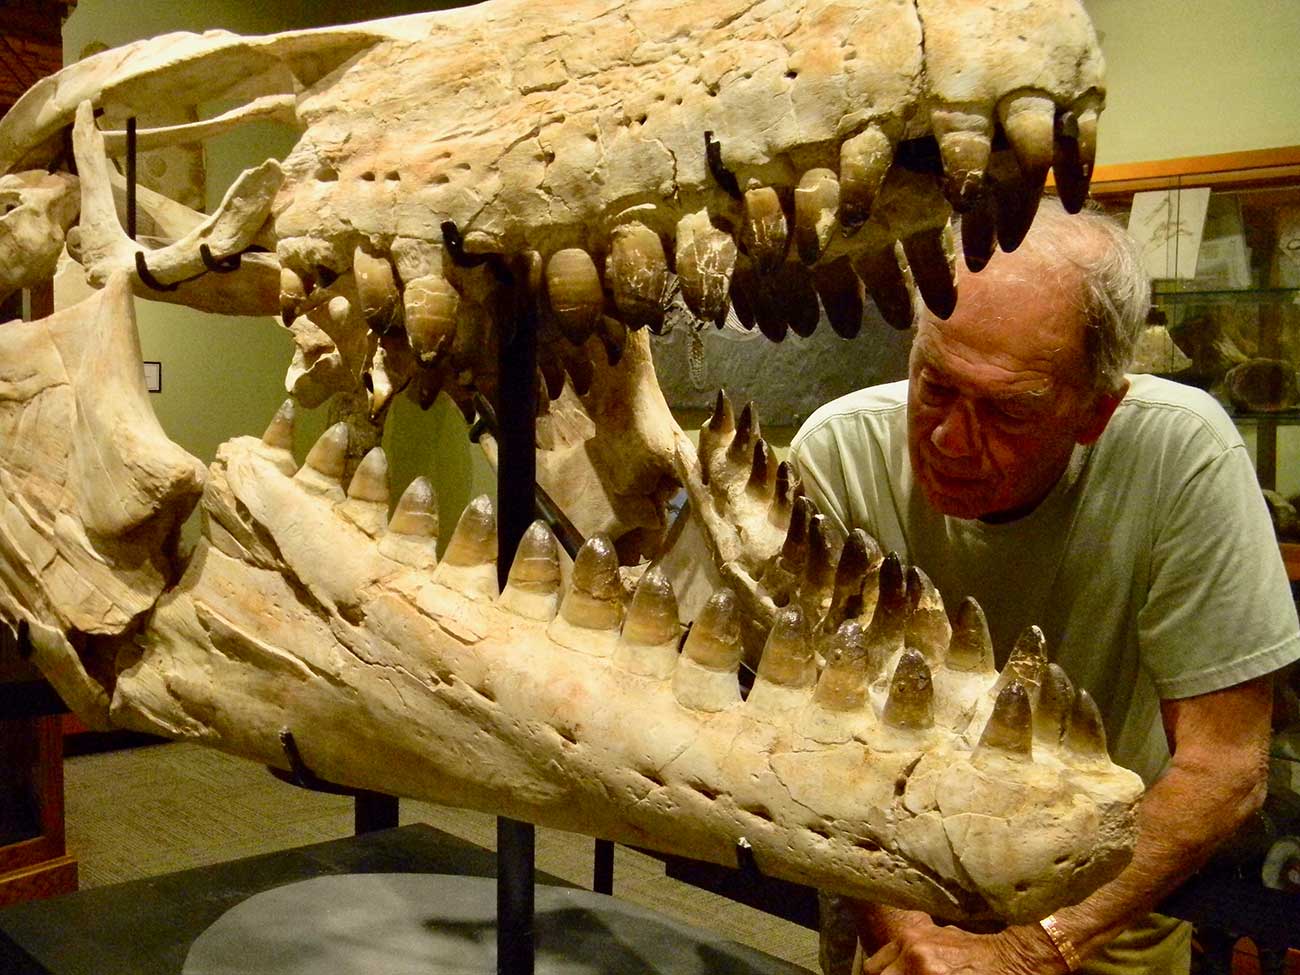 Man working on Monasaurus skull, which is related to the monitor lizard.